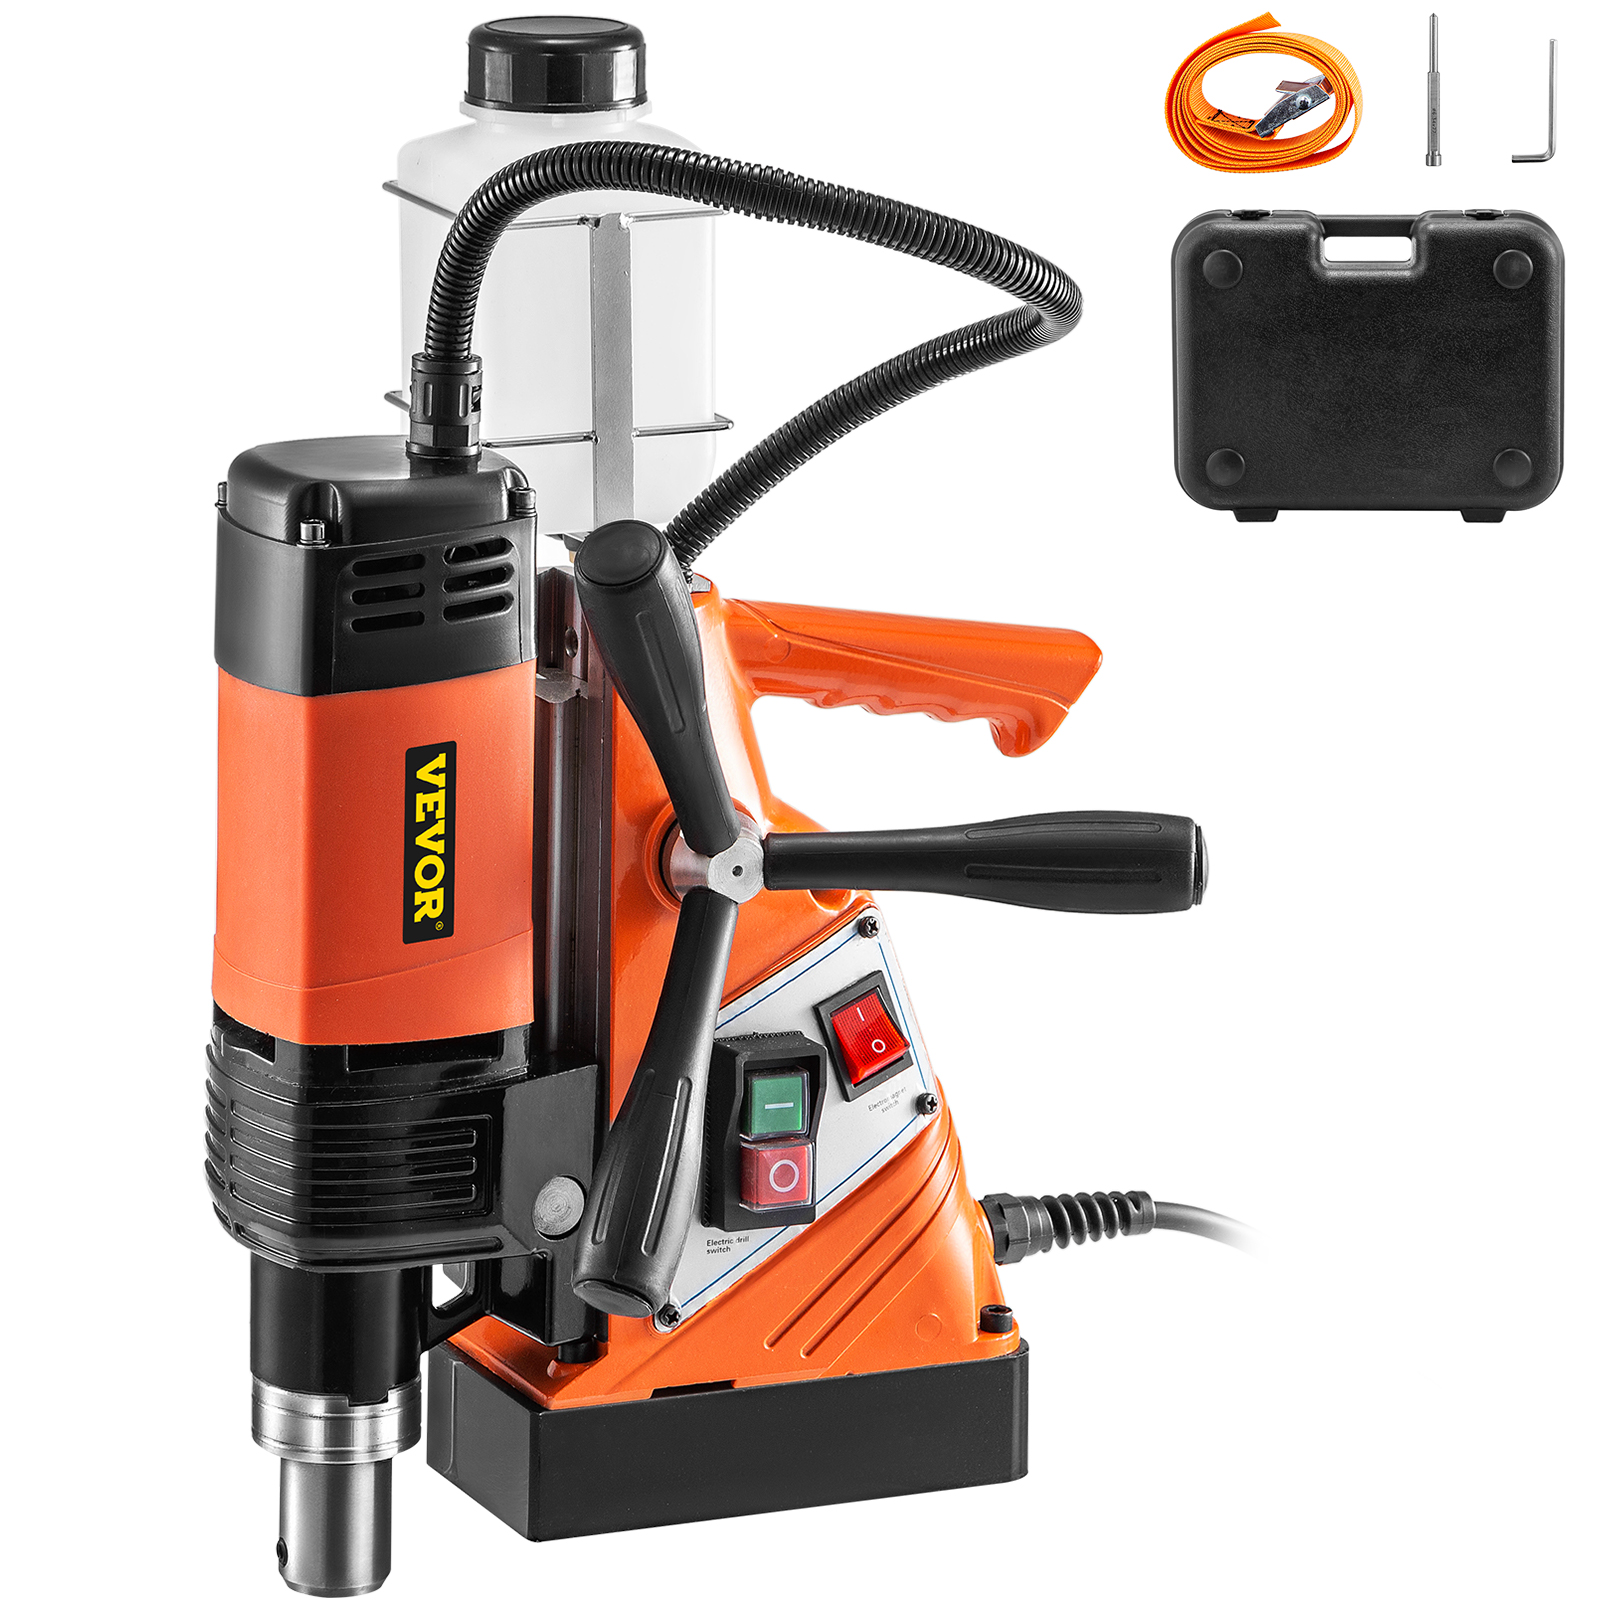 Vevor 1100w St-36 Magnetic Drill Press 1-3/8'' Boring 10000n Mag Force Tapping от Vevor Many GEOs